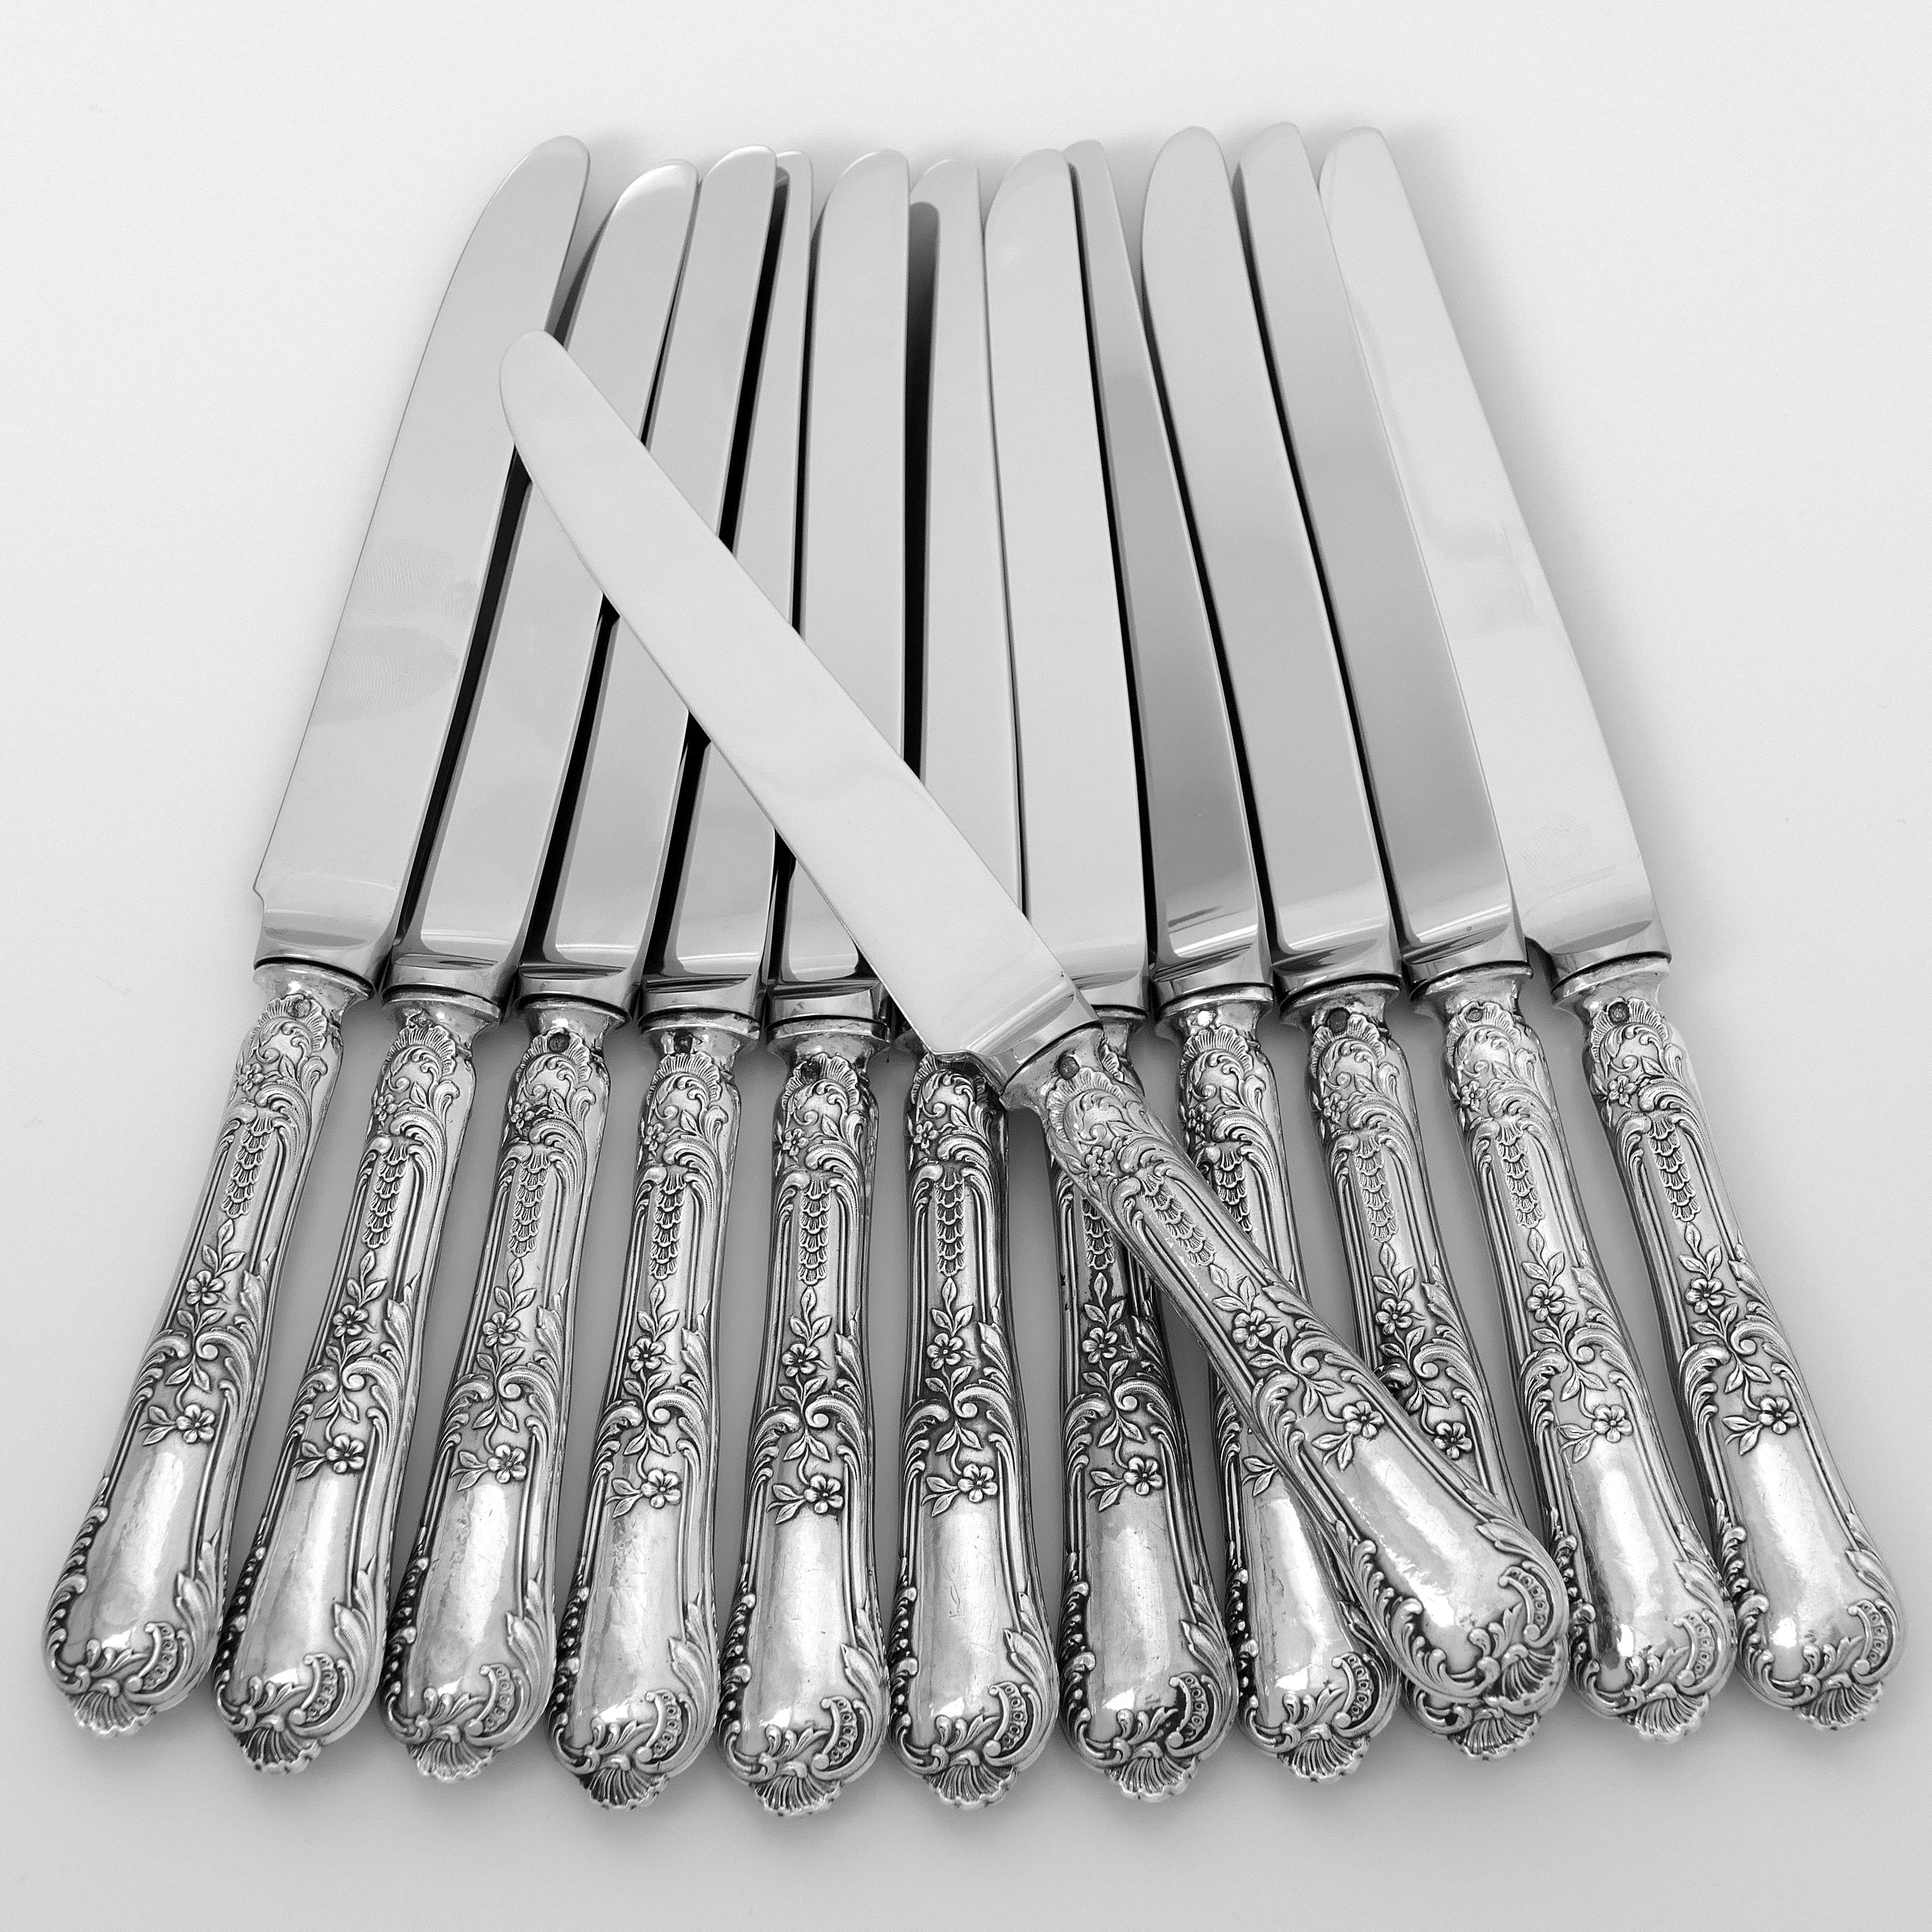 Boulenger French Sterling Silver Dinner Knife Set 12 Piece New Stainless Blades For Sale 1